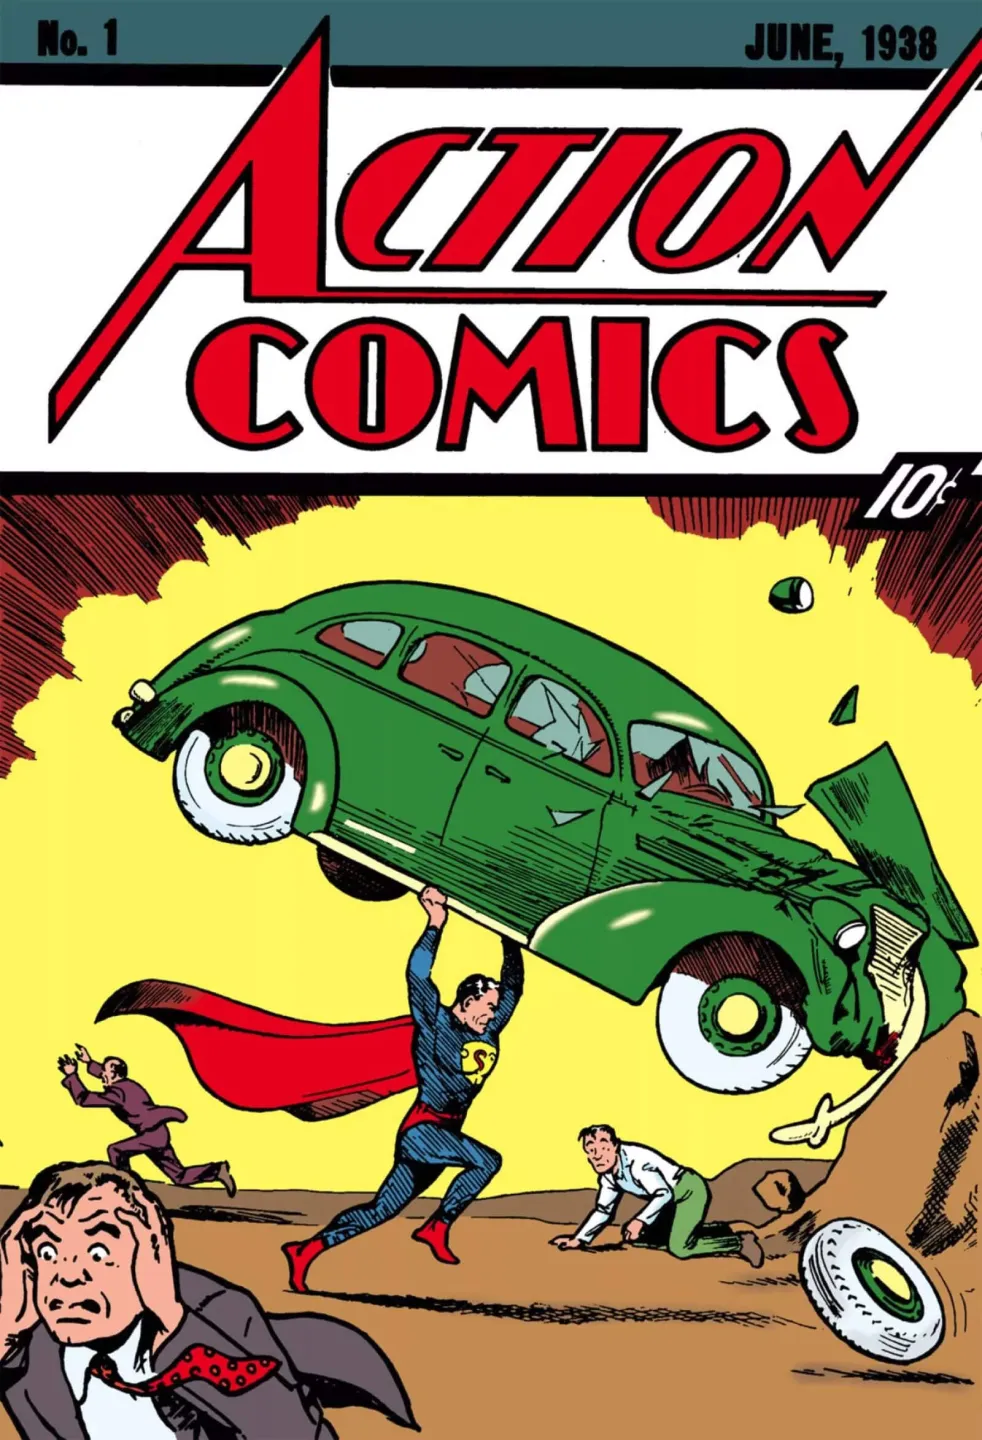 Action Comics #1 cover